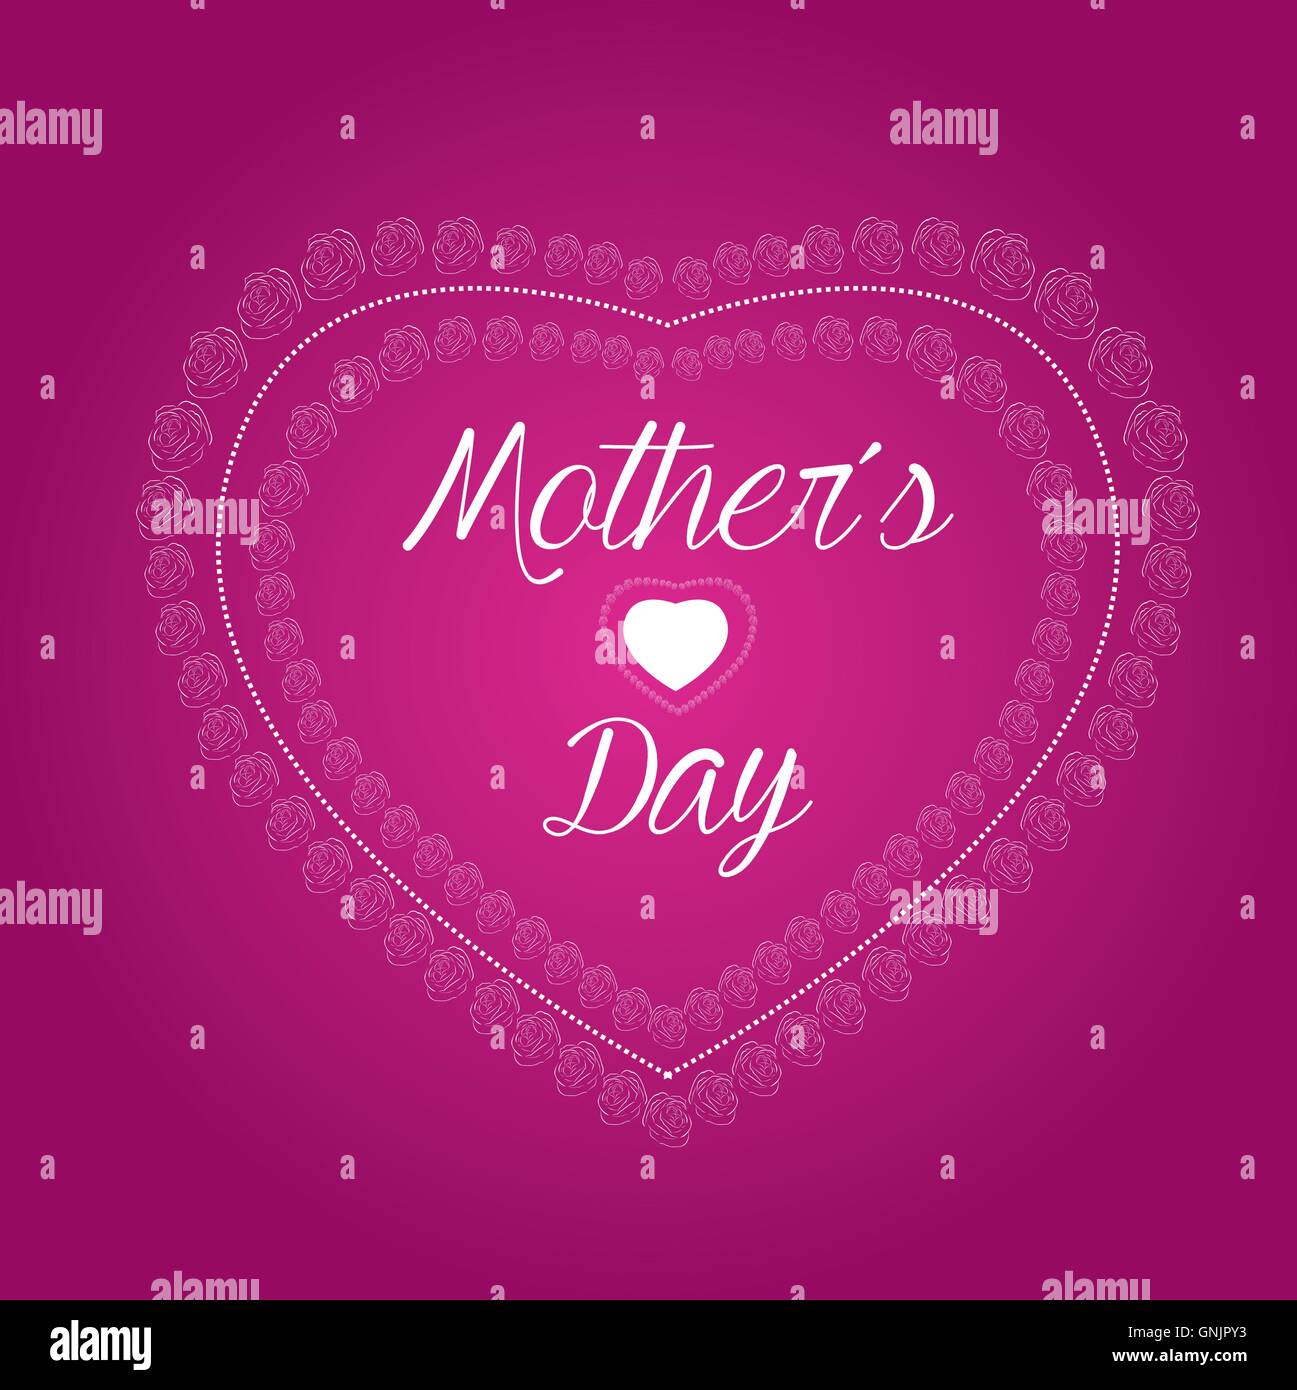 Isolated heart composed by roses and text on a colored background for mother's day celebrations Stock Vector